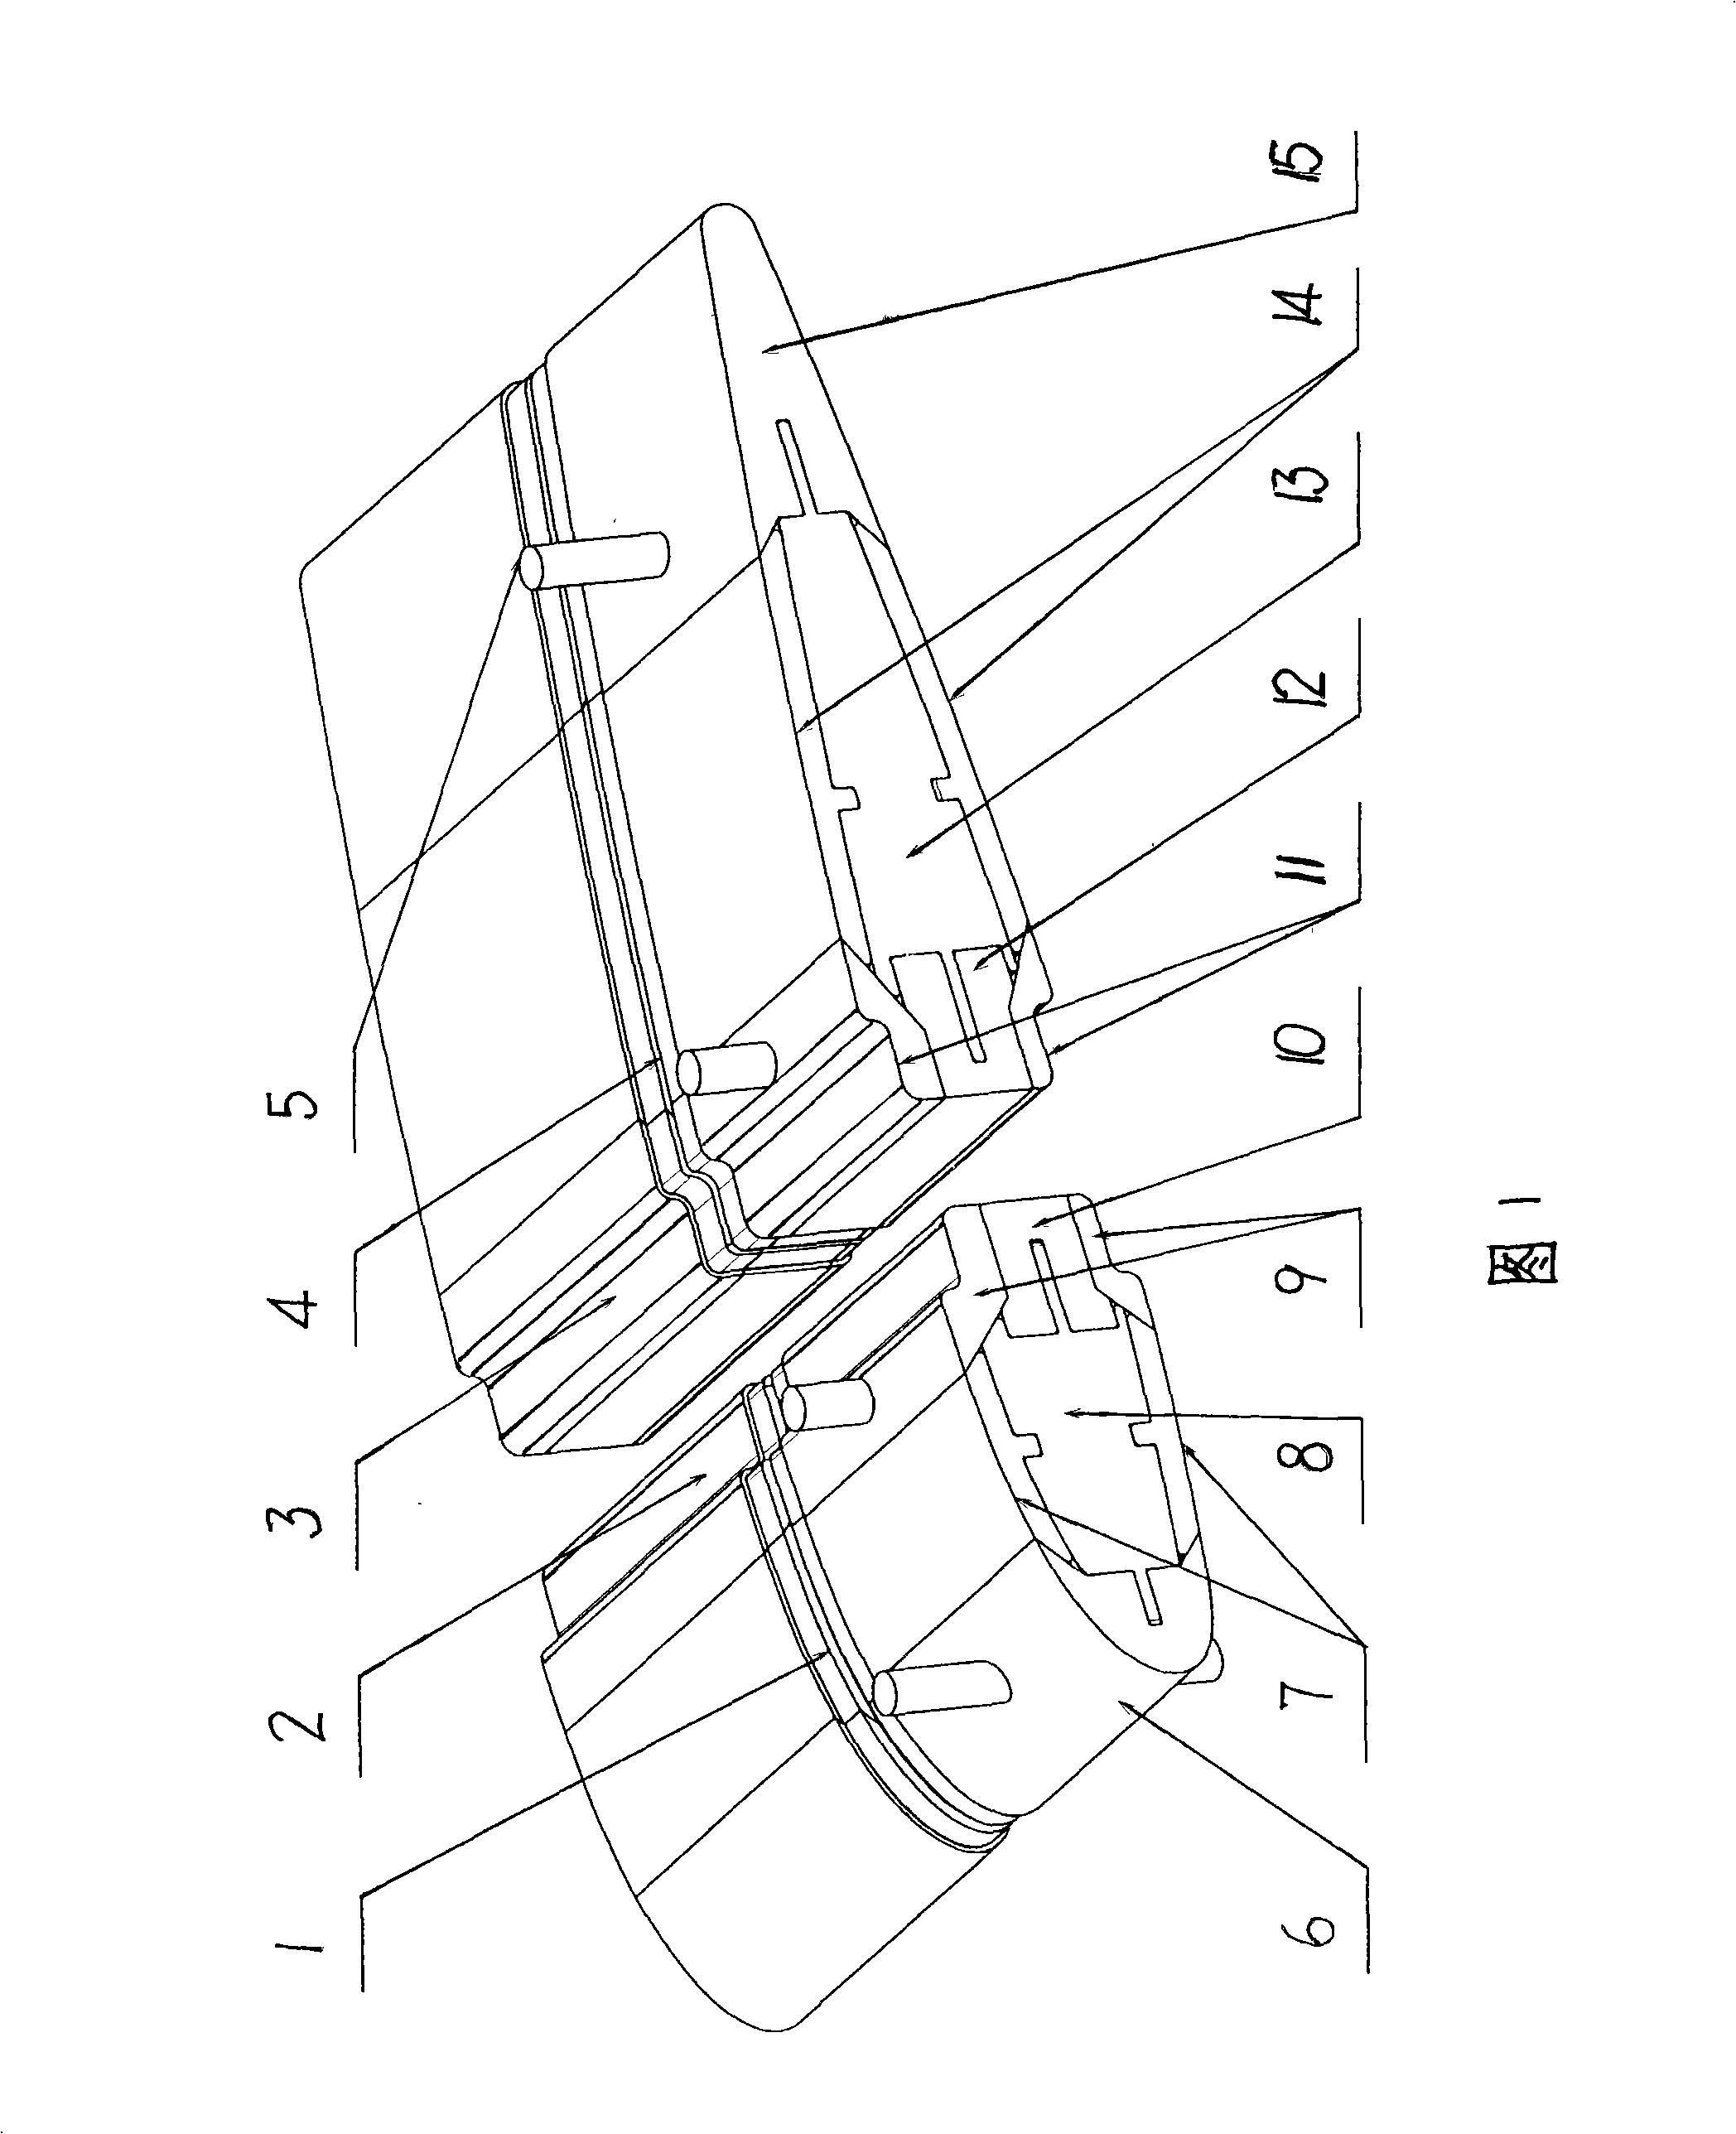 Disposal solidifying and forming technique for frame and outer panel skin of wing profile